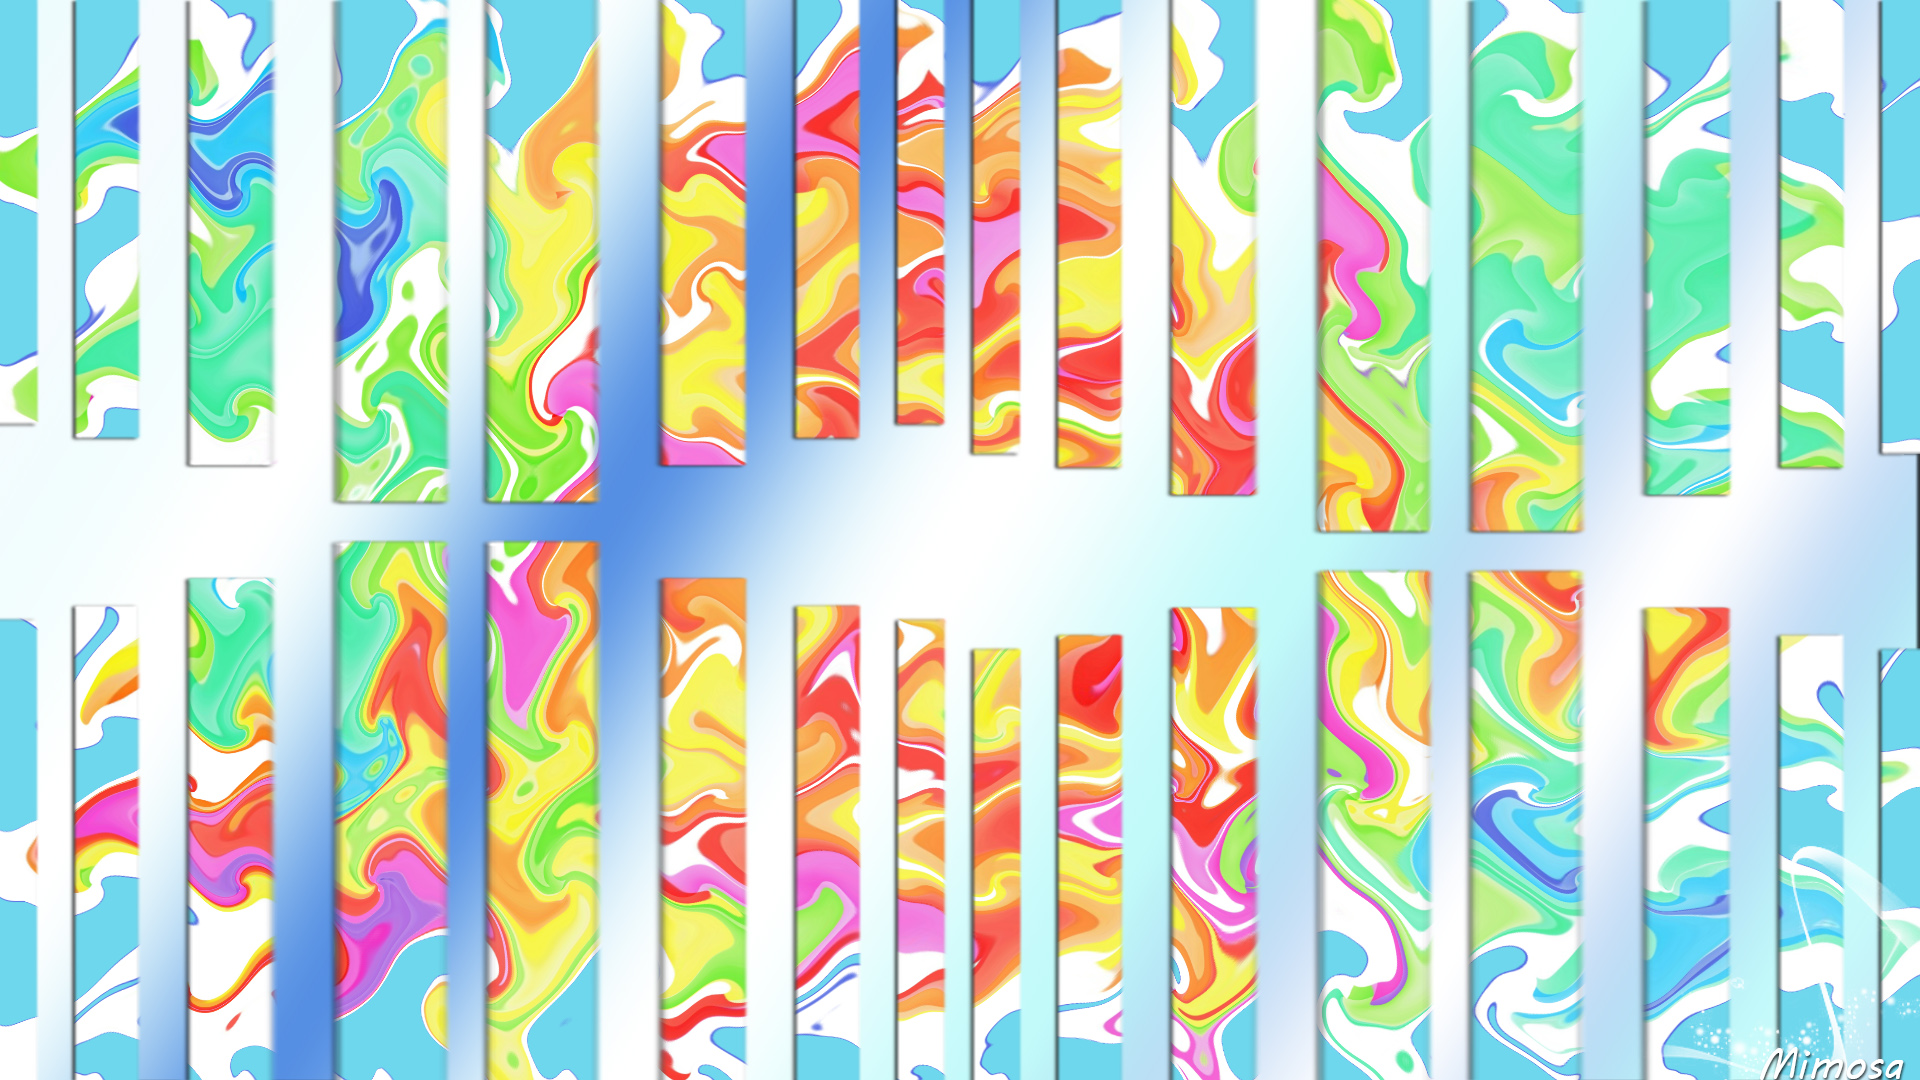 Abstract Artistic Colorful Digital Art Shapes 1920x1080